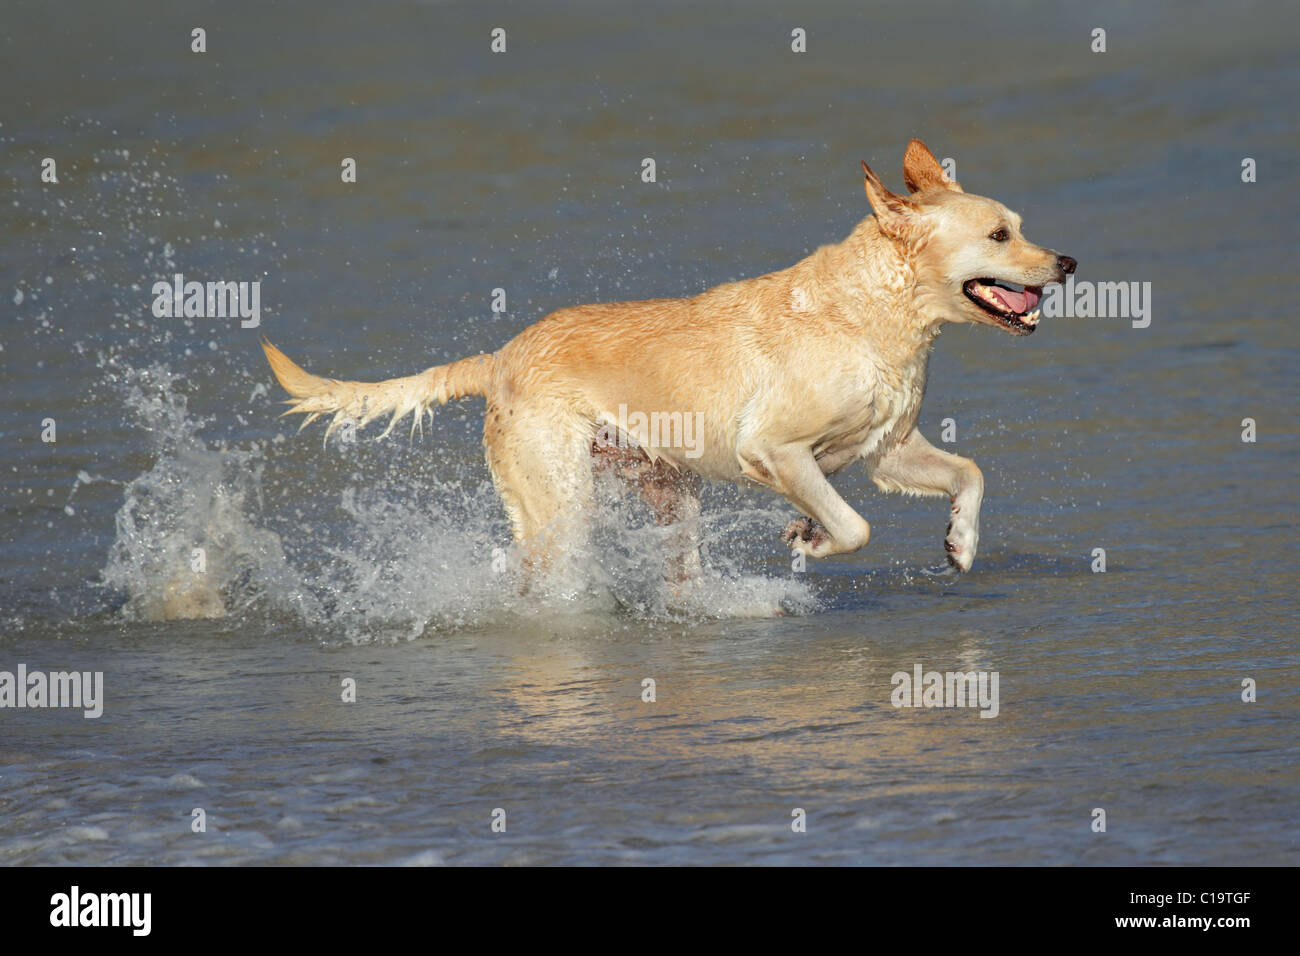 Golden retriever running and playing in shallow water Stock Photo